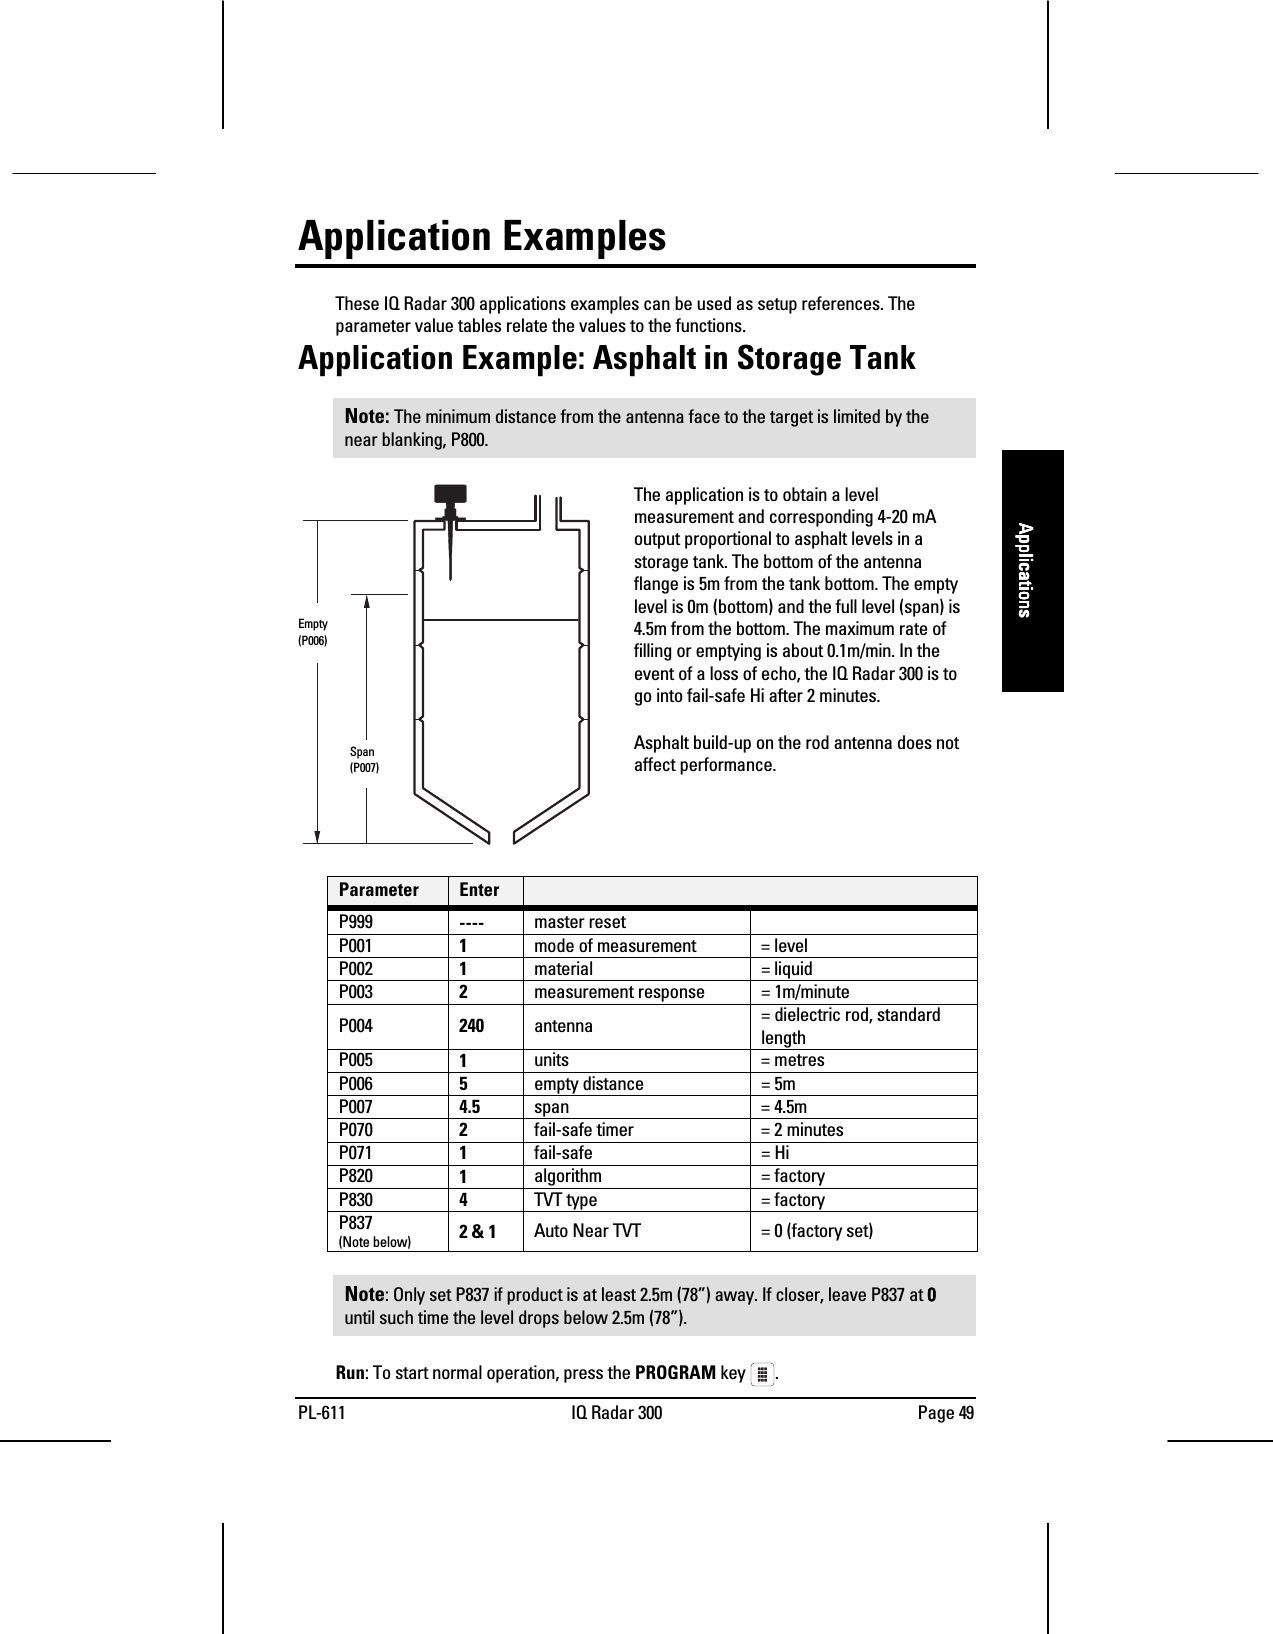 PL-611 IQ Radar 300 Page 49ApplicationsApplicationsApplicationsApplicationsApplication ExamplesThese IQ Radar 300 applications examples can be used as setup references. Theparameter value tables relate the values to the functions.Application Example: Asphalt in Storage TankNote: The minimum distance from the antenna face to the target is limited by thenear blanking, P800.The application is to obtain a levelmeasurement and corresponding 4-20 mAoutput proportional to asphalt levels in astorage tank. The bottom of the antennaflange is 5m from the tank bottom. The emptylevel is 0m (bottom) and the full level (span) is4.5m from the bottom. The maximum rate offilling or emptying is about 0.1m/min. In theevent of a loss of echo, the IQ Radar 300 is togo into fail-safe Hi after 2 minutes.Asphalt build-up on the rod antenna does notaffect performance.Parameter EnterP999 ---- master resetP001 1mode of measurement = levelP002 1material = liquidP003 2measurement response = 1m/minuteP004 240 antenna = dielectric rod, standardlengthP005 1units = metresP006 5empty distance = 5mP007 4.5 span = 4.5mP070 2fail-safe timer = 2 minutesP071 1fail-safe = HiP820 1algorithm = factoryP830 4TVT type = factoryP837(Note below) 2 &amp; 1 Auto Near TVT = 0 (factory set)Note: Only set P837 if product is at least 2.5m (78”) away. If closer, leave P837 at 0000until such time the level drops below 2.5m (78”).Run: To start normal operation, press the PROGRAM key  .     Empty     (P006)  Span  (P007)